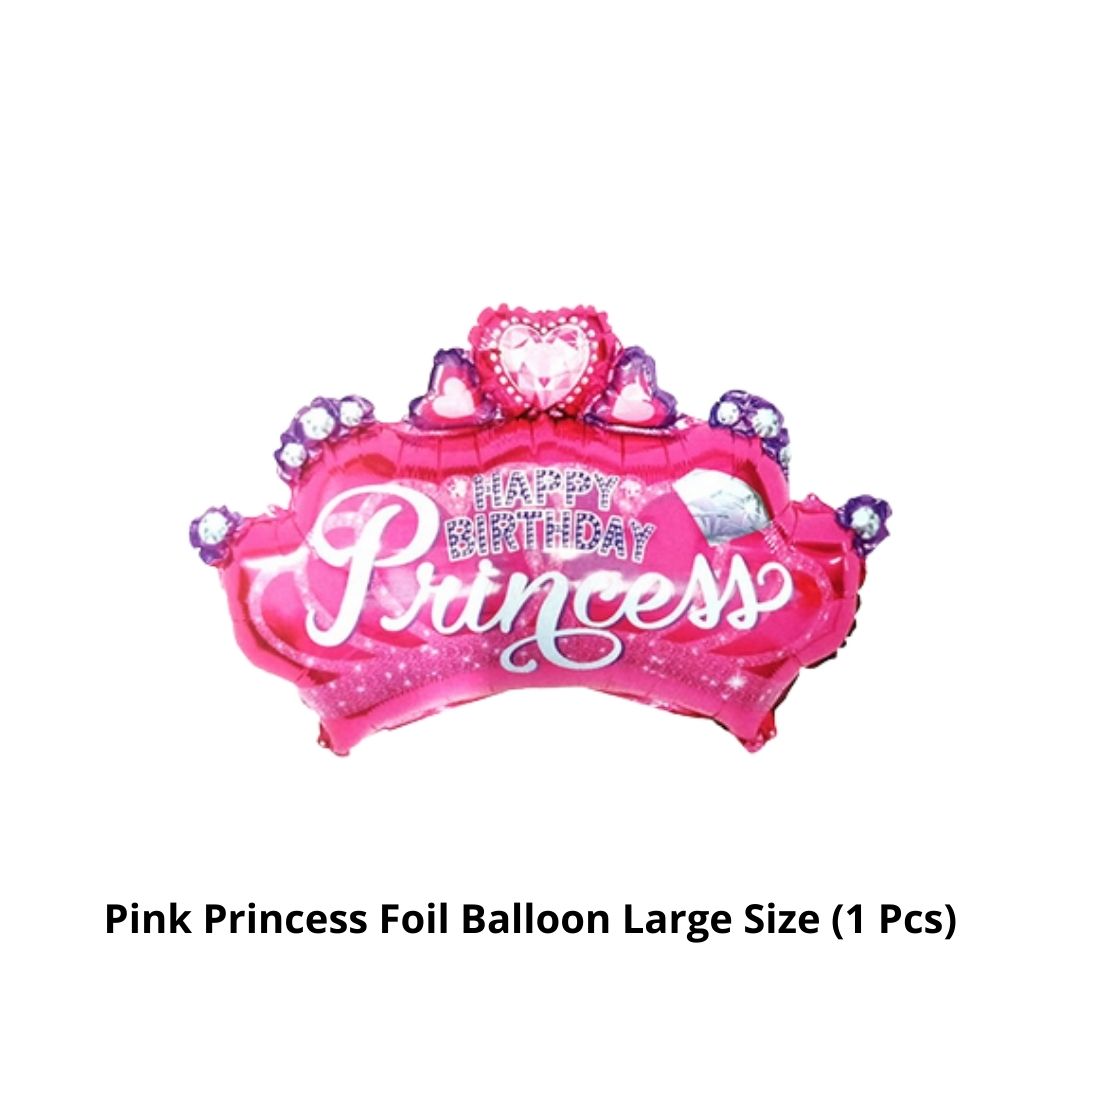 Party Decor Mall Princess Theme Foil Balloon for Birthday Parties, Celebrations and Event Decorations Set of 5